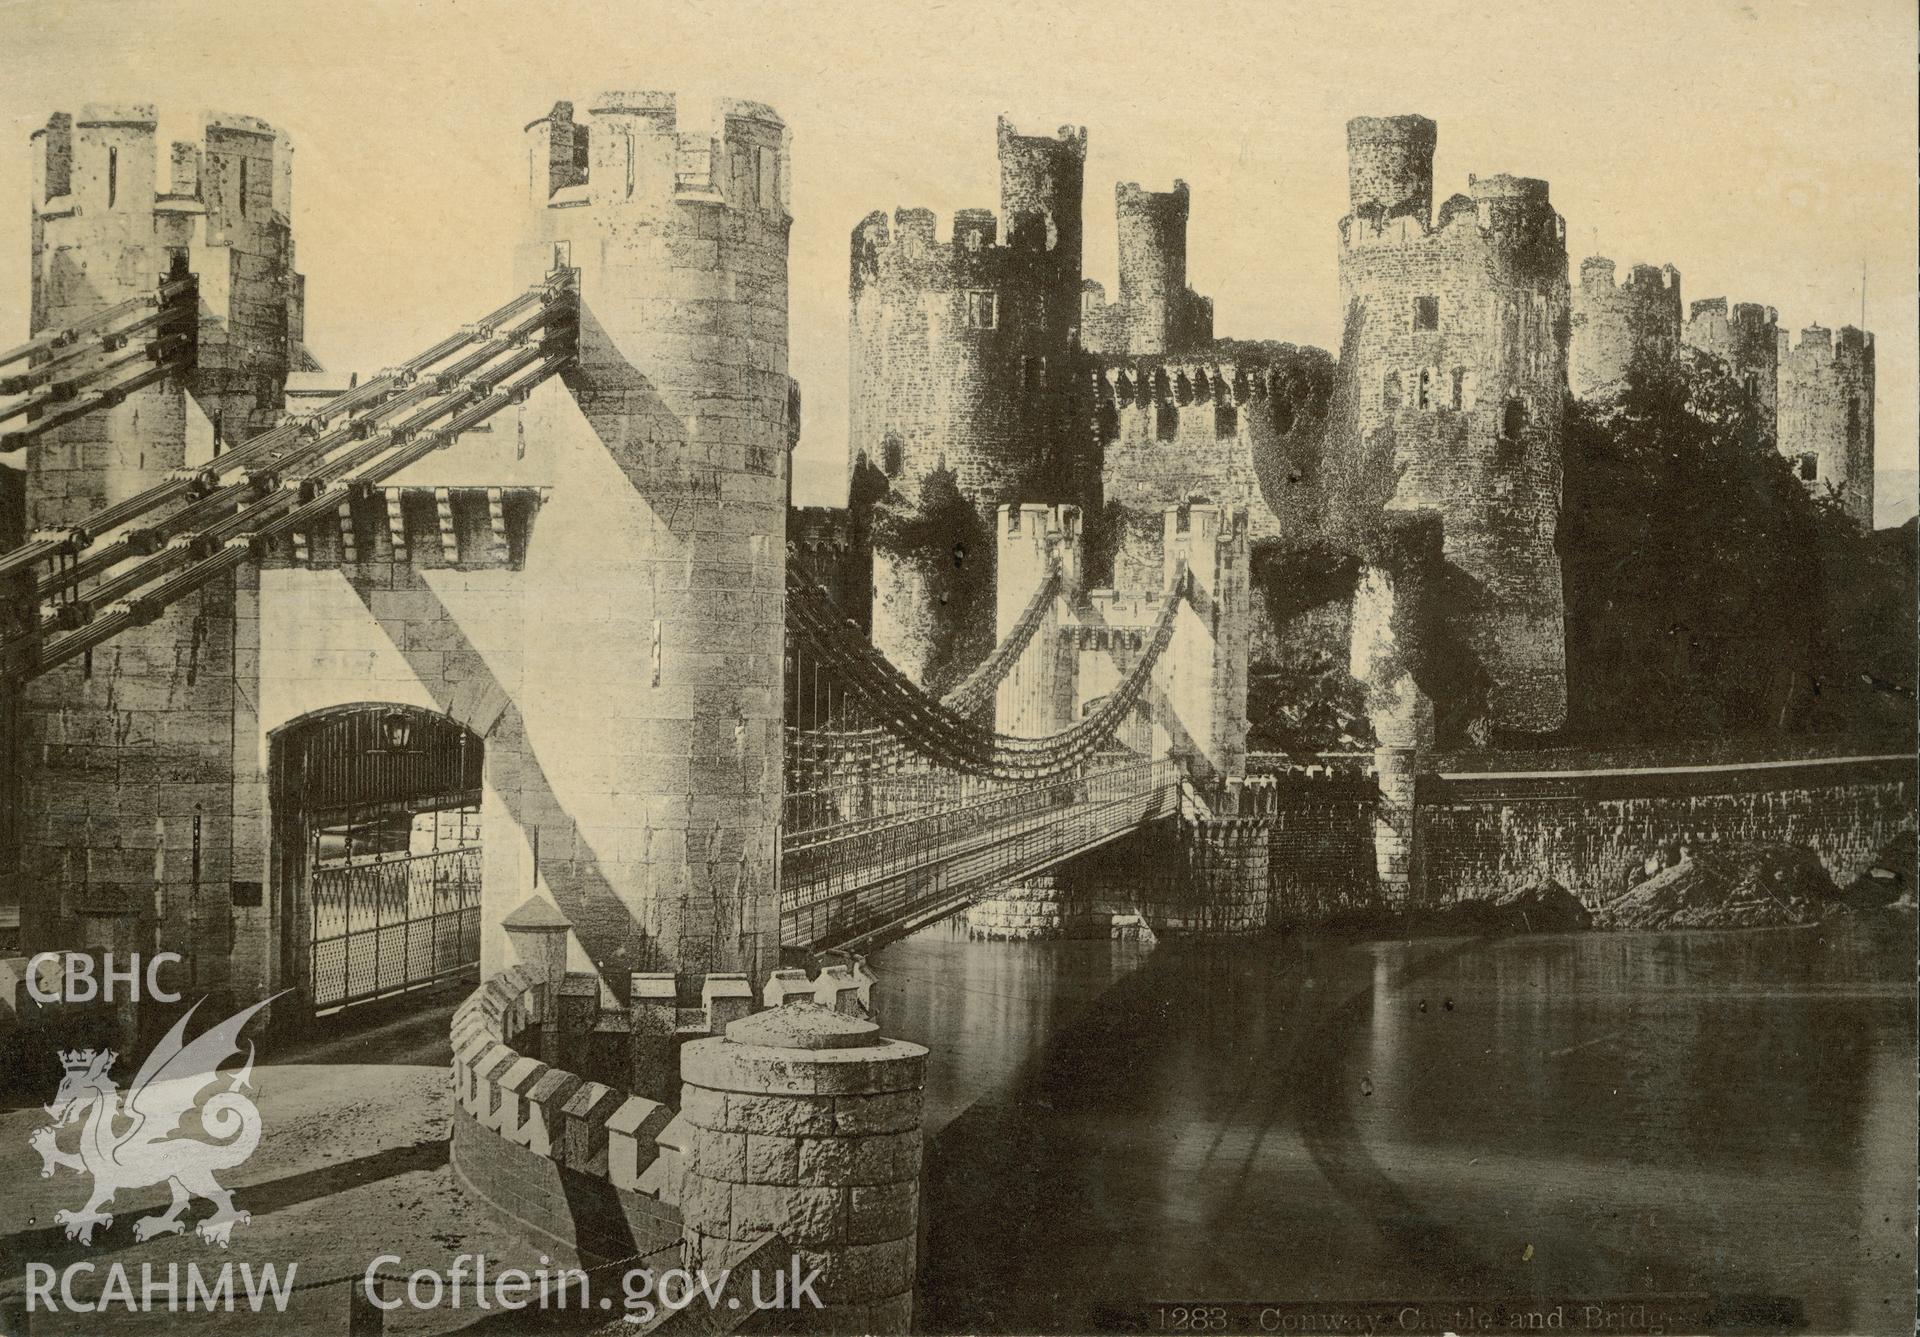 Digital copy of an albumen print showing an early view of Conway Castle.